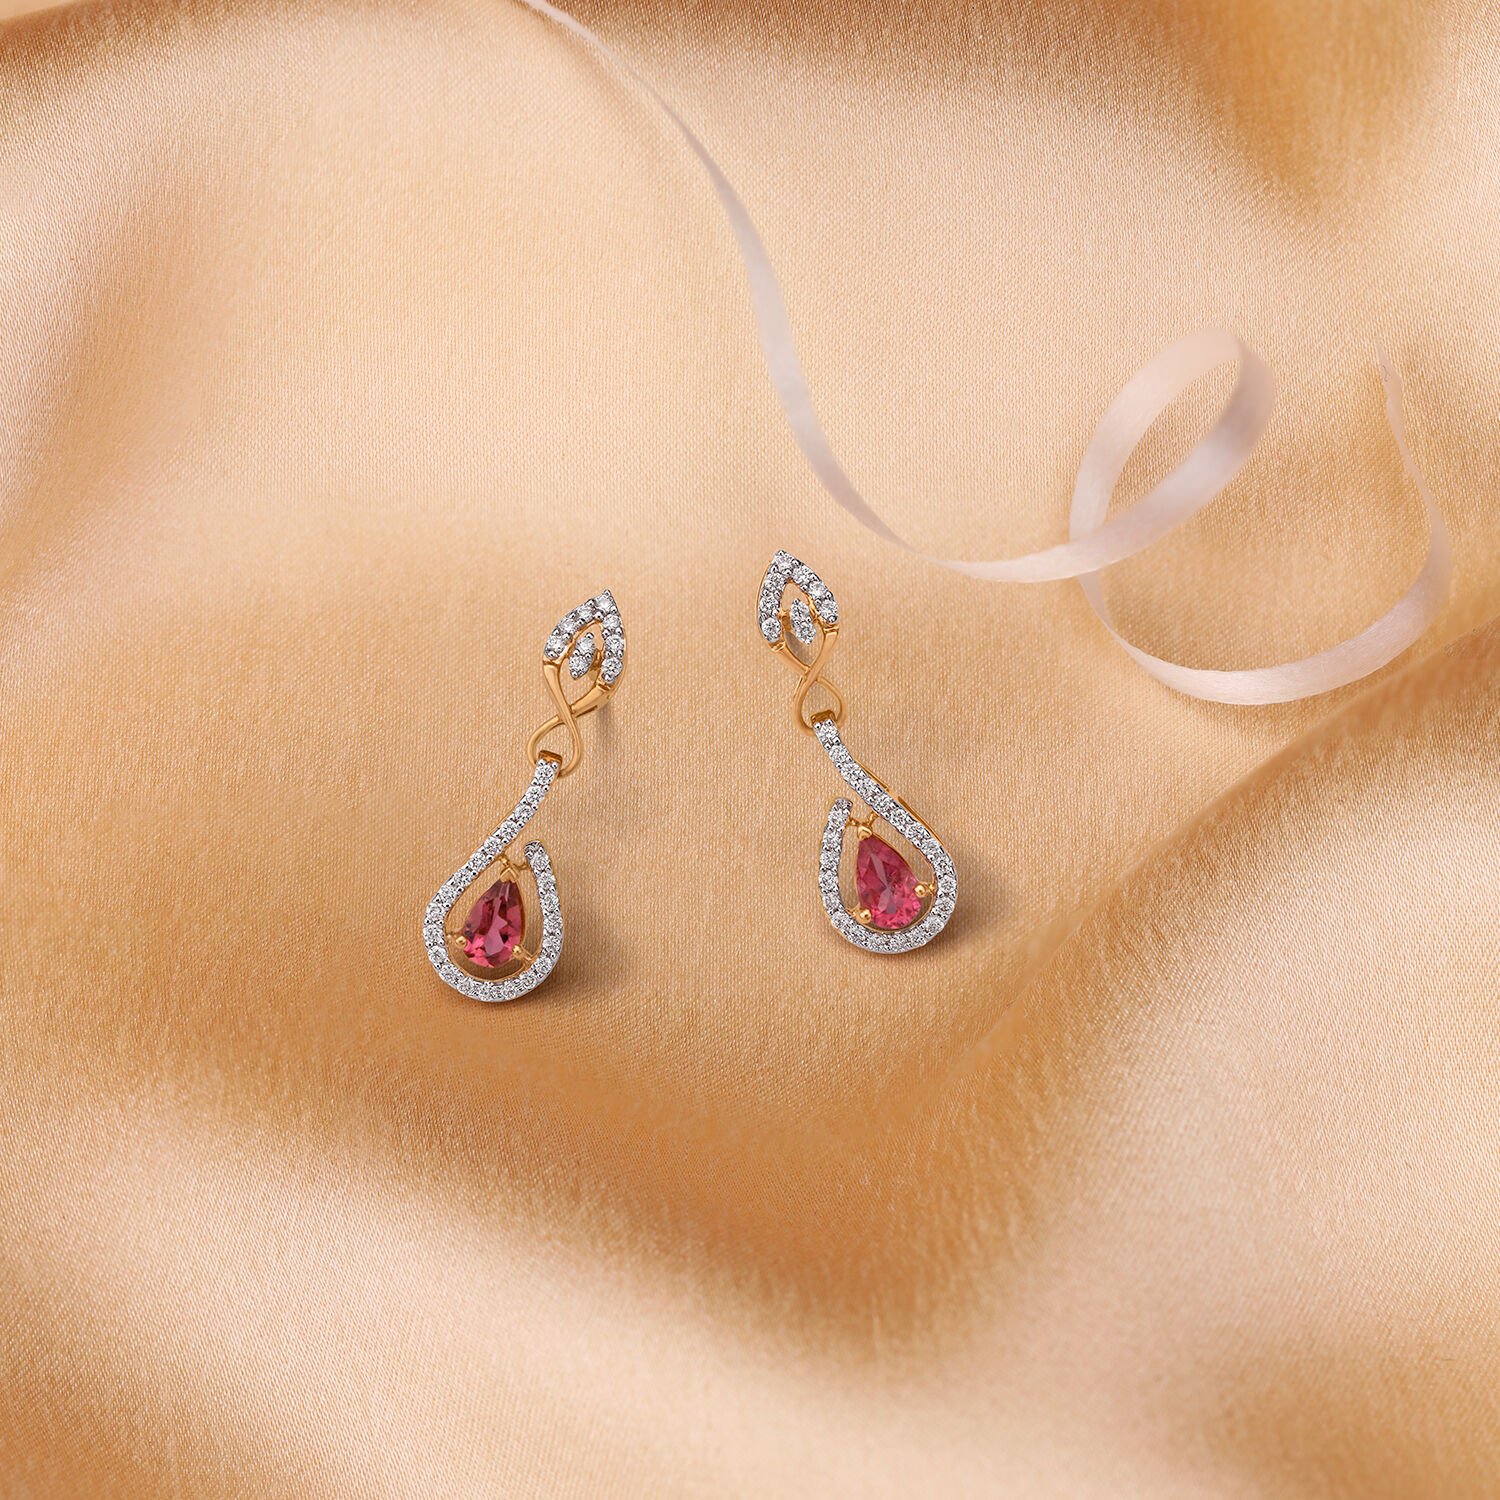 Enticing Diamond and Gold Drop Earrings